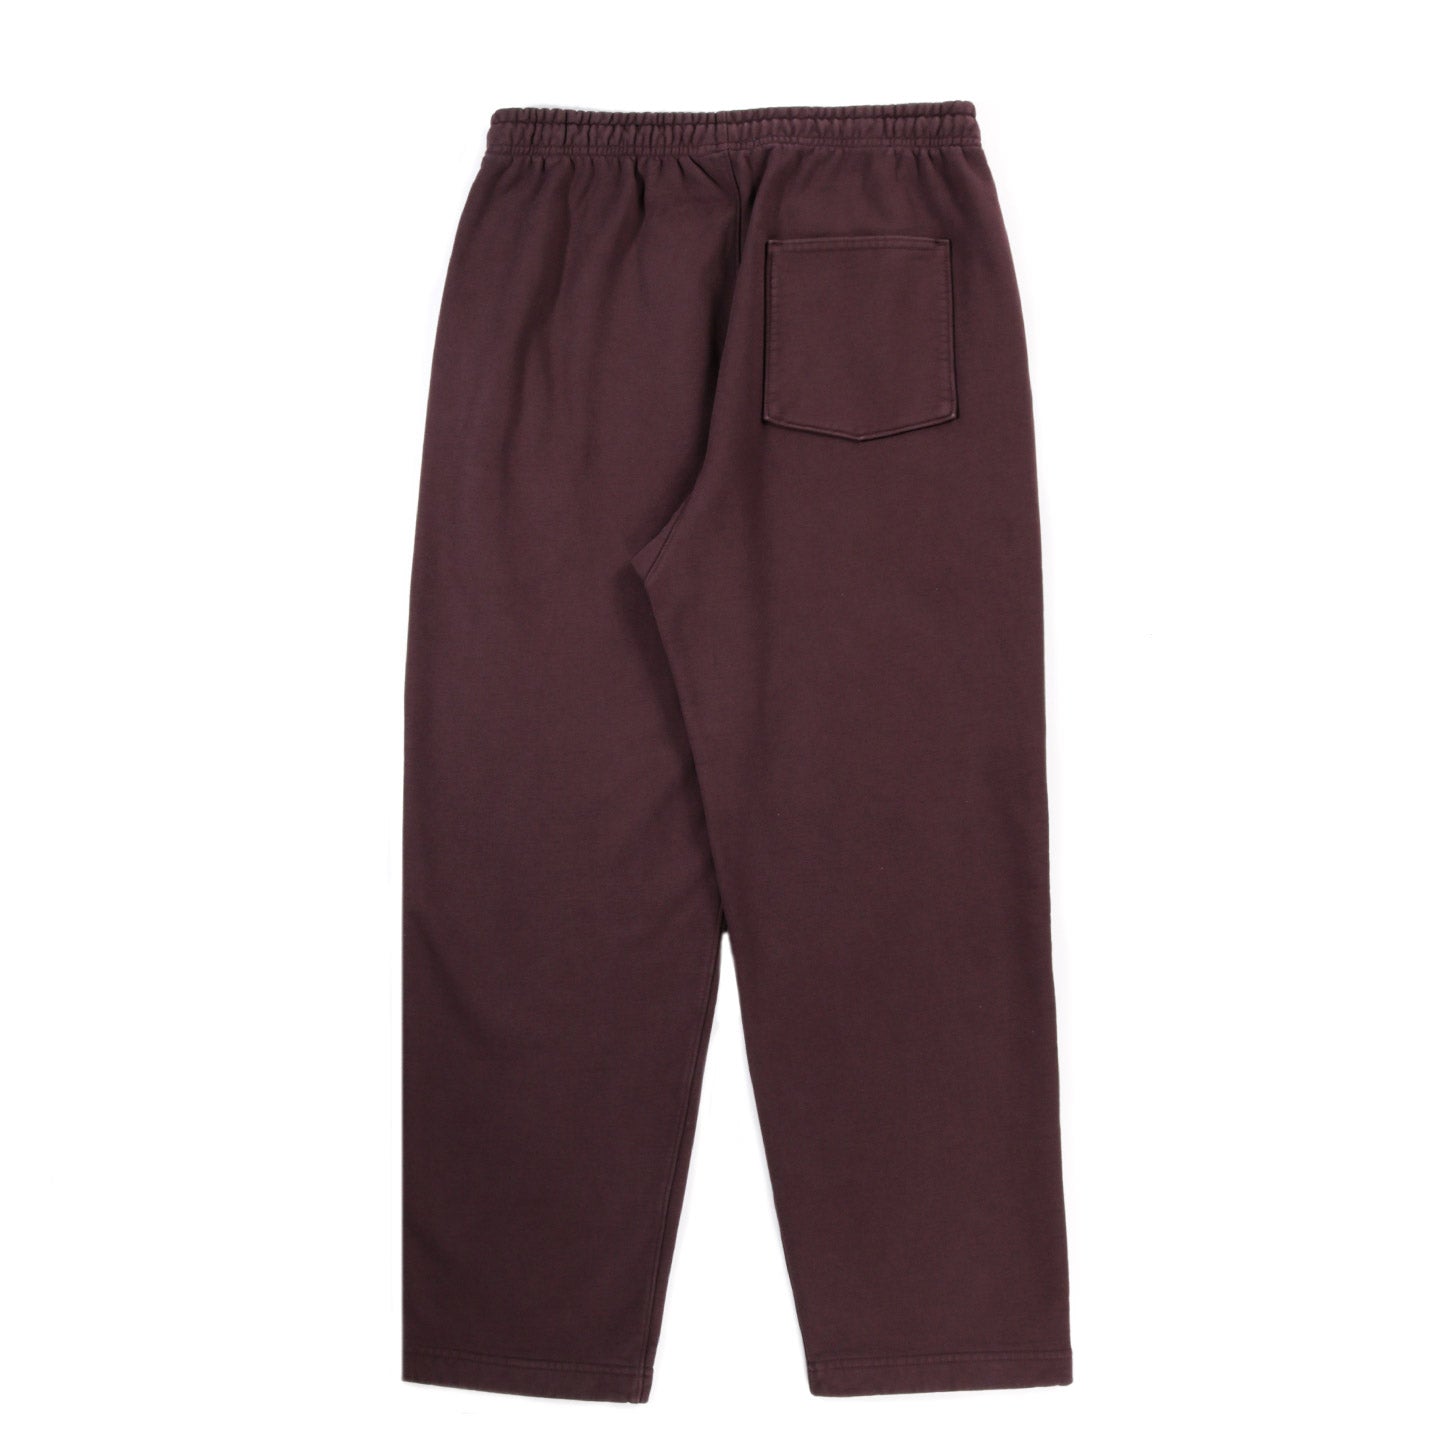 LADY WHITE CO. SUPER WEIGHTED SWEATPANT RAISIN